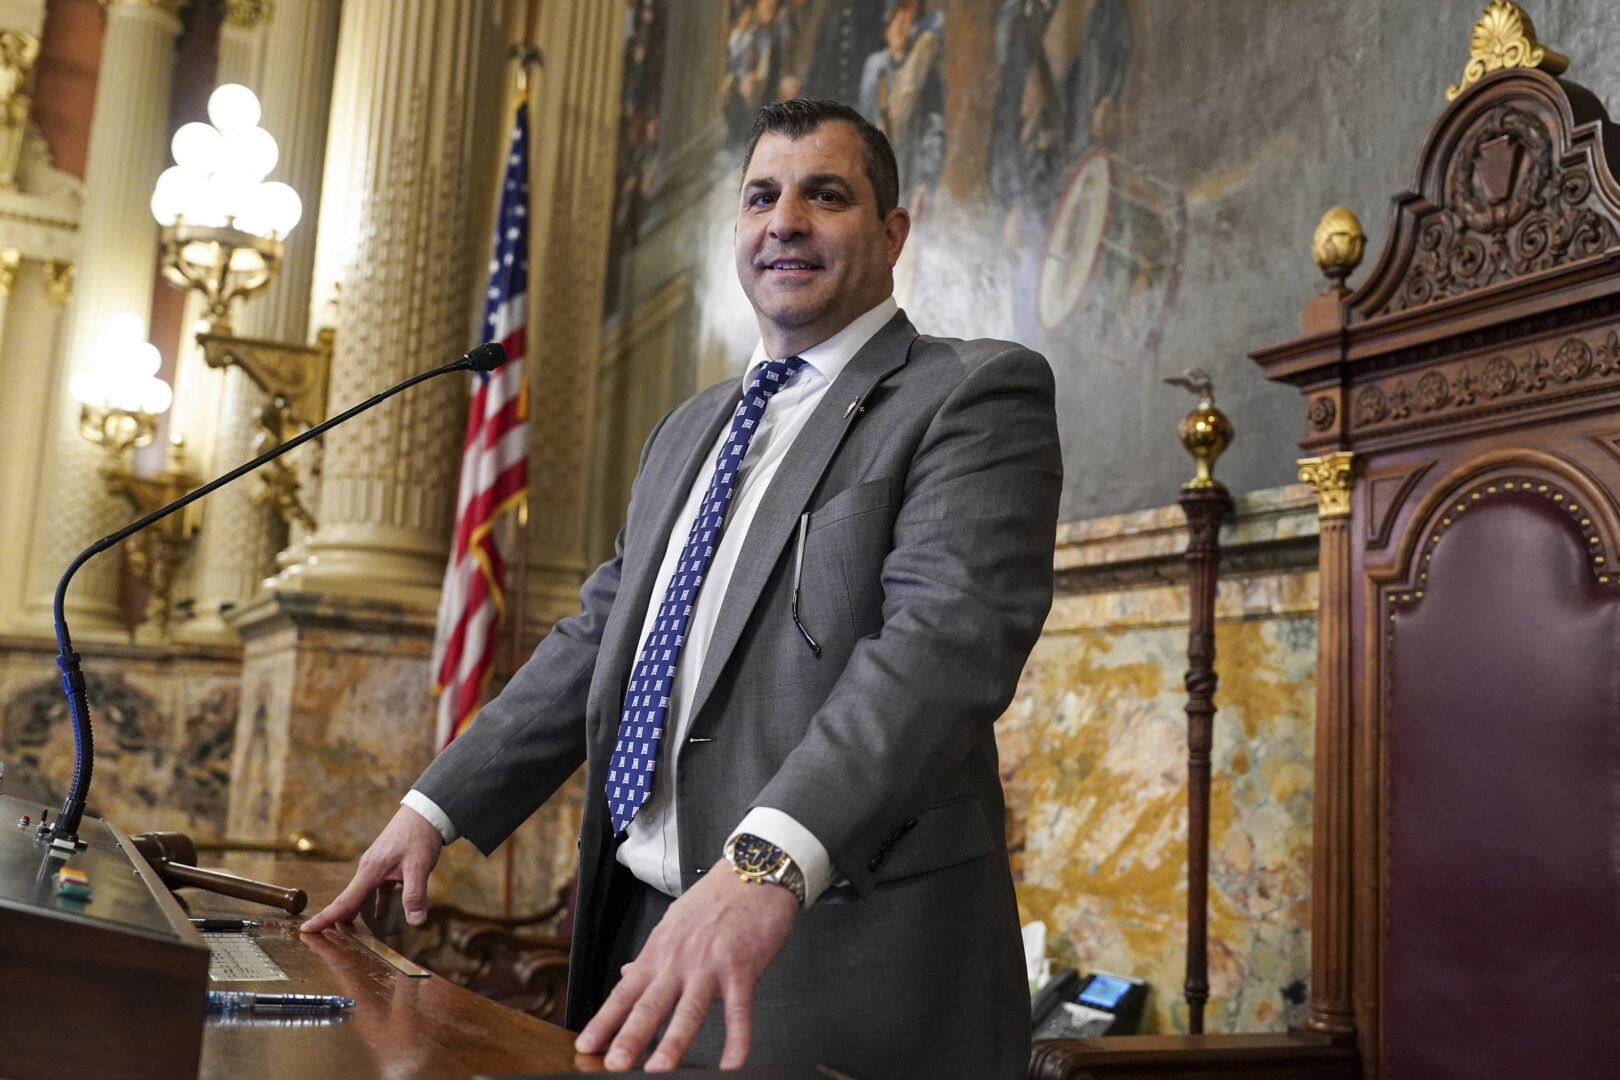 Pennsylvania Speaker of the House Mark Rozzi is photographed at the speaker's podium, Tuesday, Jan. 3, 2023, at the state Capitol in Harrisburg, Pa. (AP Photo/Matt Smith)